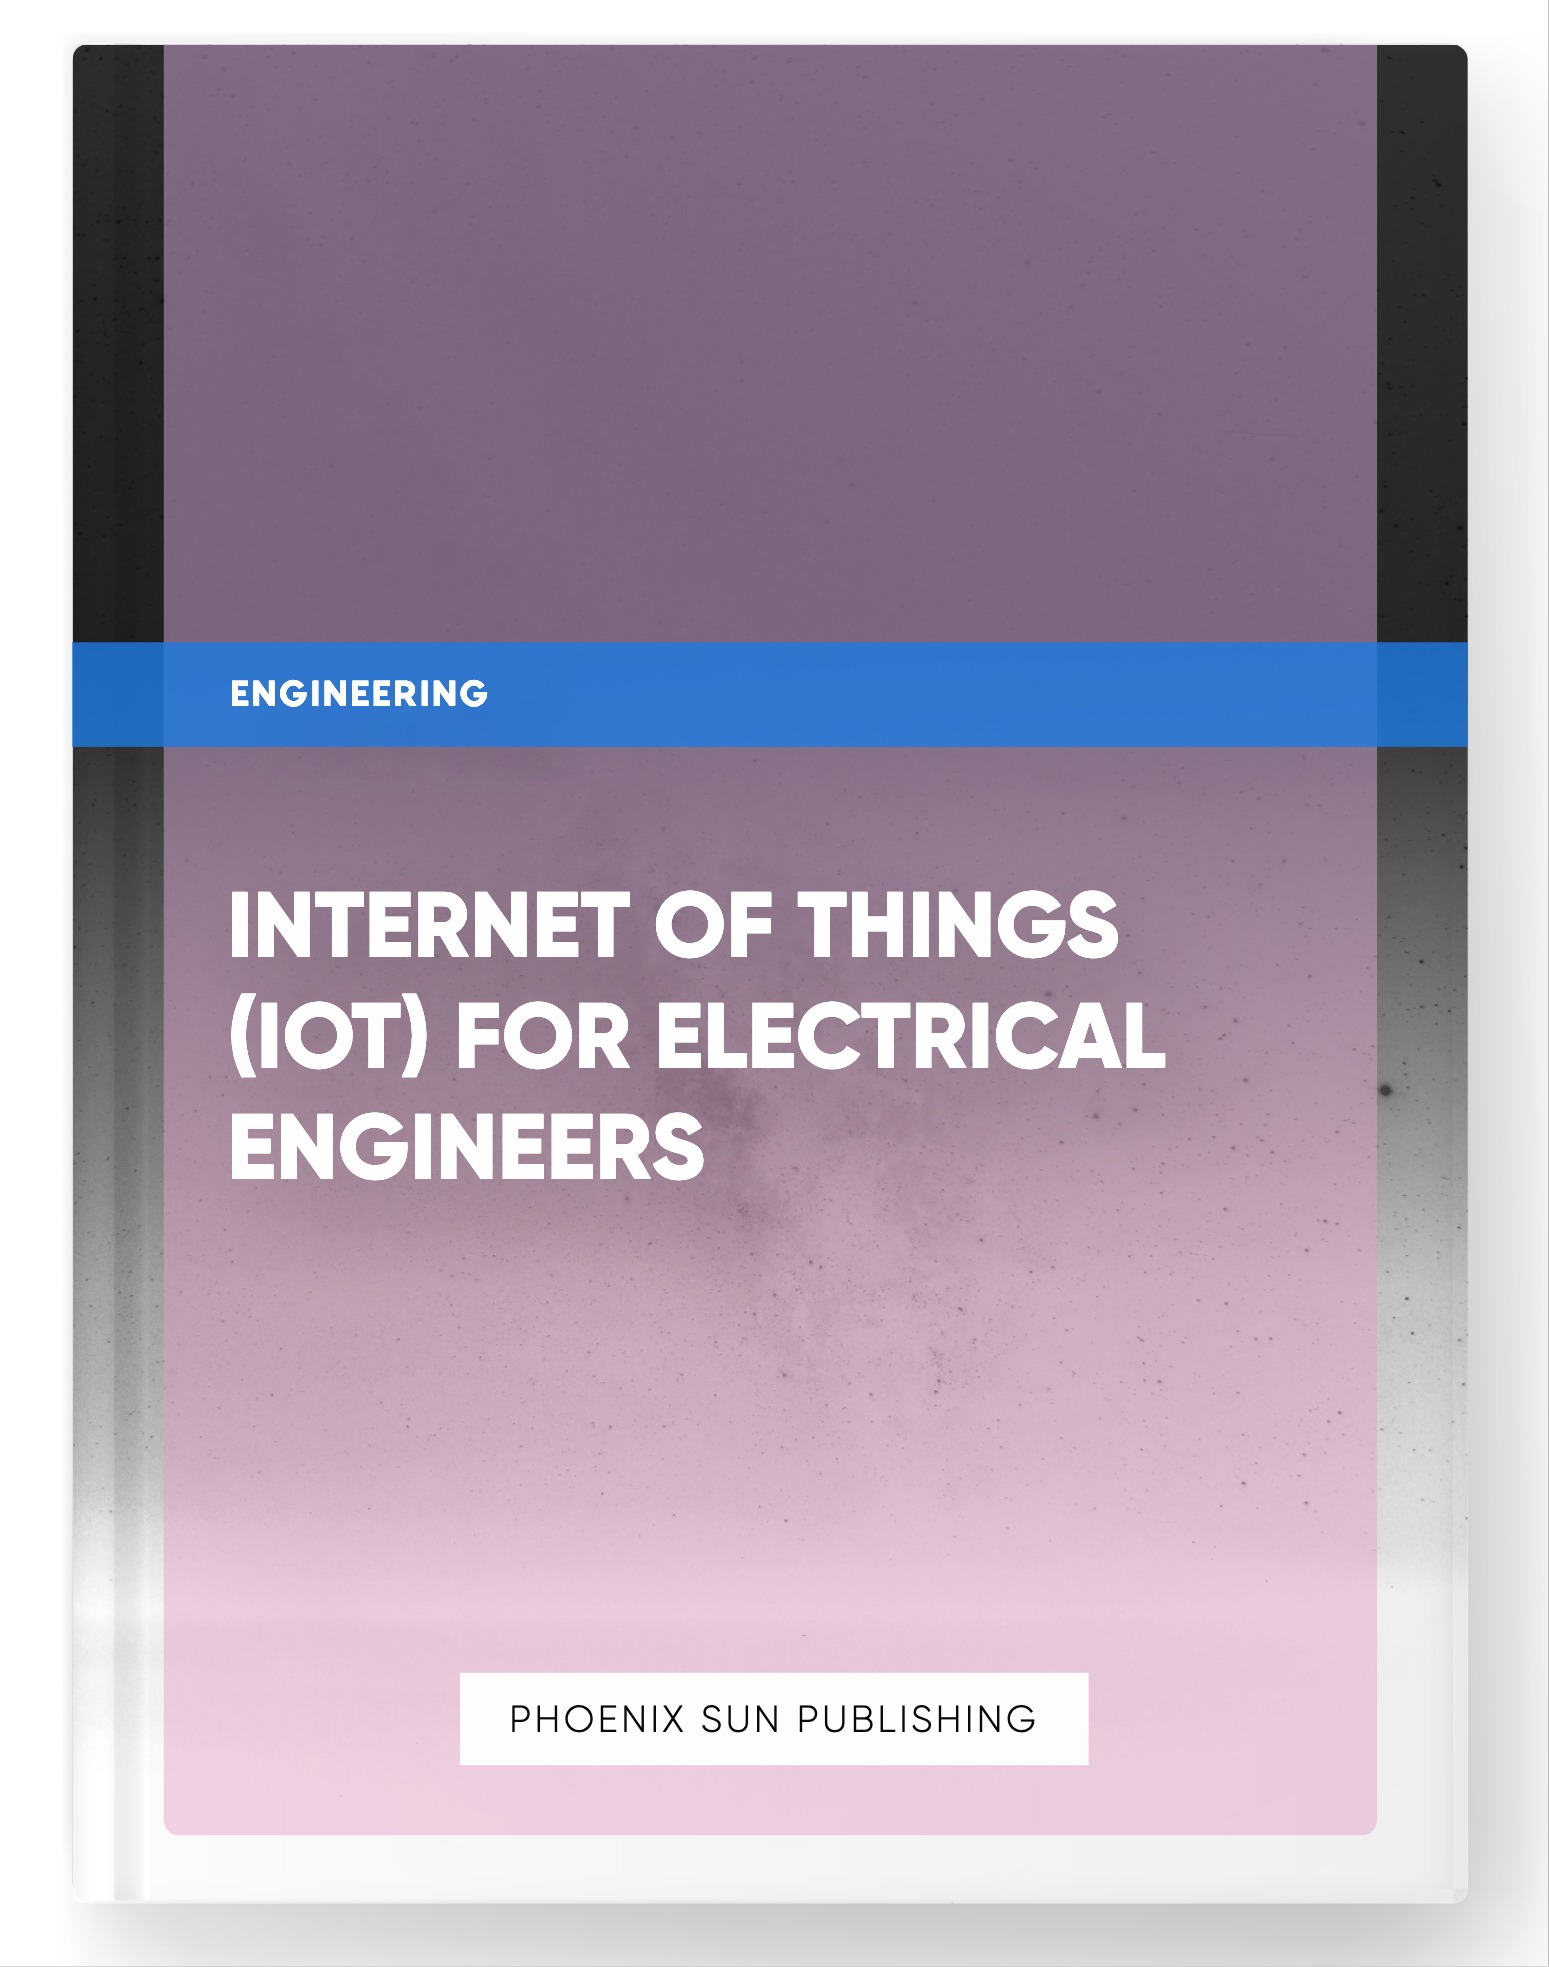 Internet of Things (IoT) for Electrical Engineers